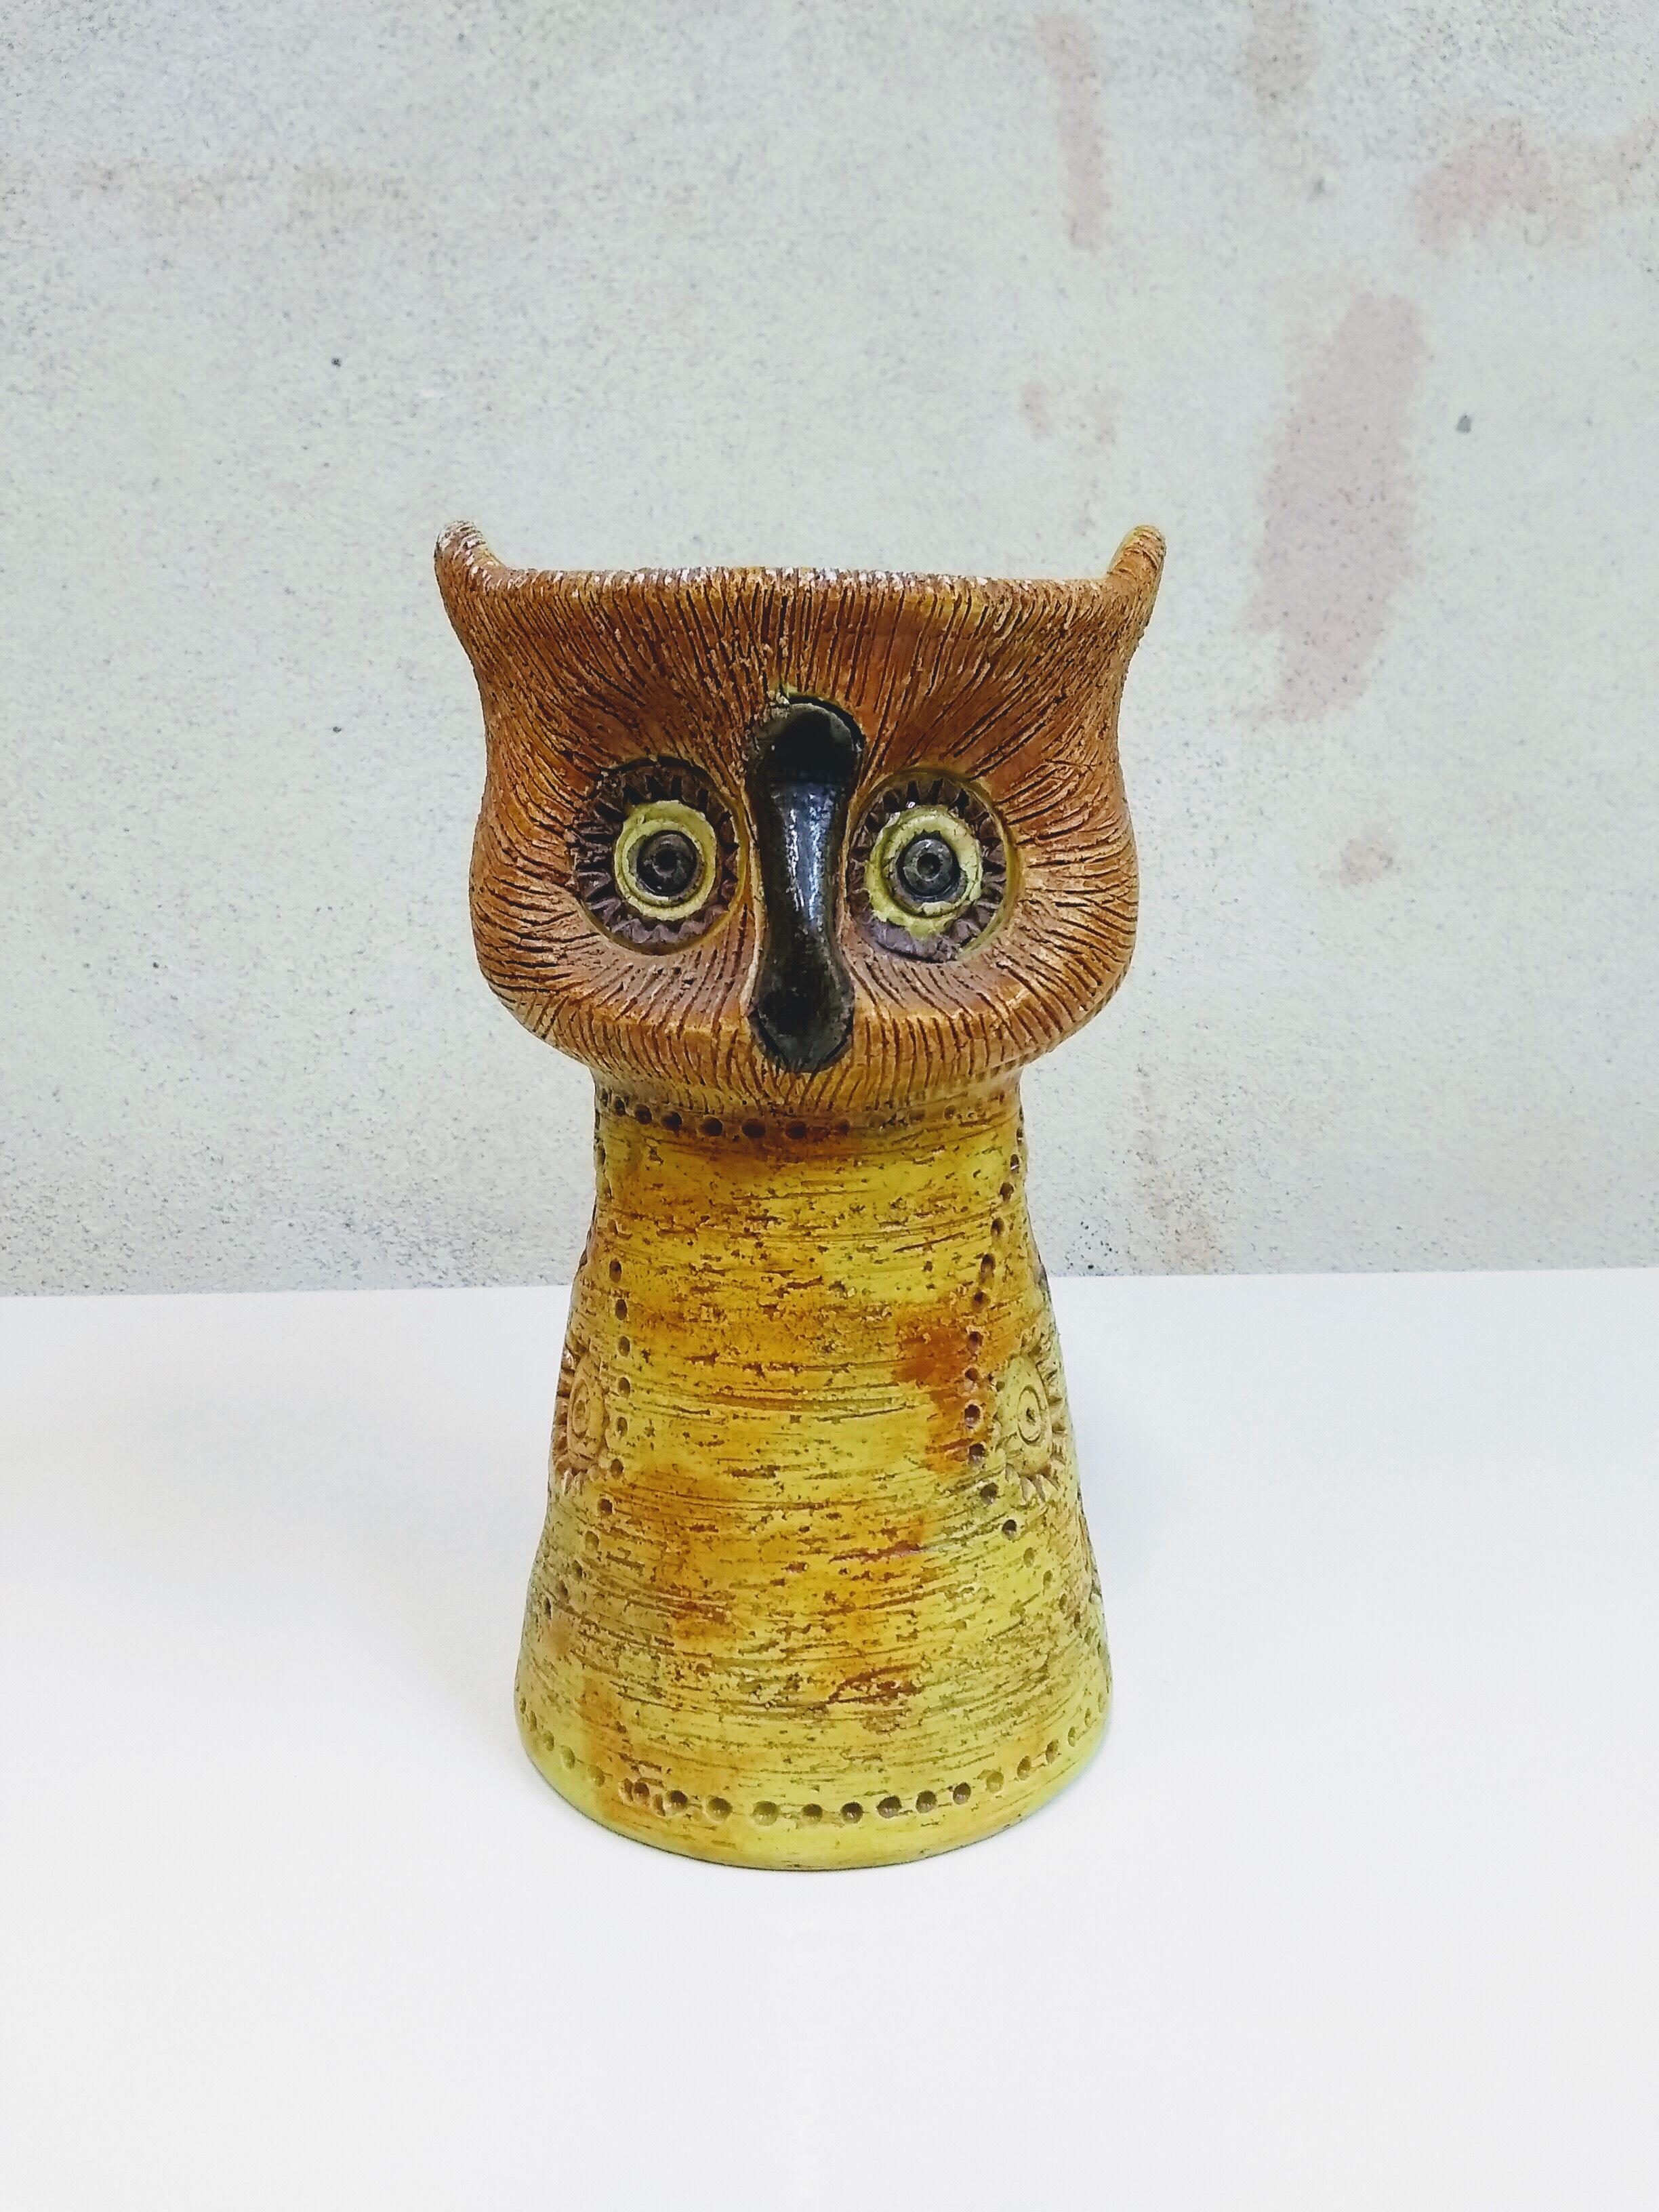 A hand-thrown ceramic owl (candle votive) designed by iconic Italian ceramicist Aldo Londi for Bitossi Ceramics, imported to the USA by Rosenthal and Netter in the 1950s.

A playful, figural abstract in sunny yellow ochre, brown-orange and green